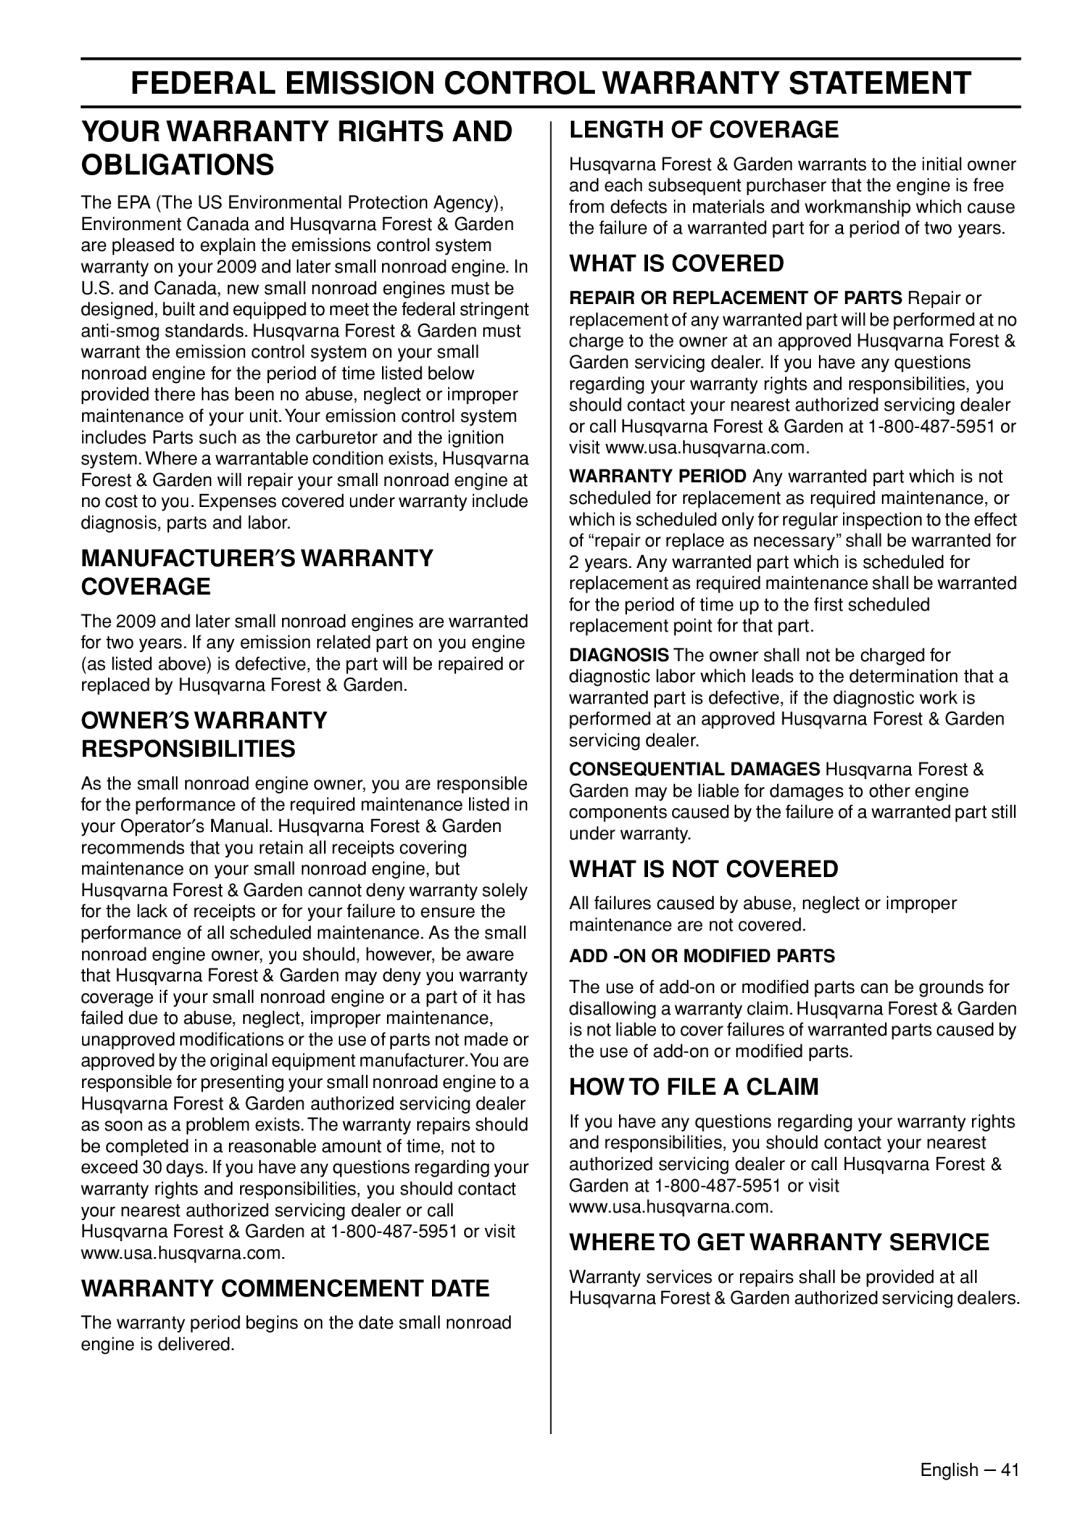 Husqvarna 1153181-95 Federal Emission Control Warranty Statement, Your Warranty Rights And Obligations, Length Of Coverage 